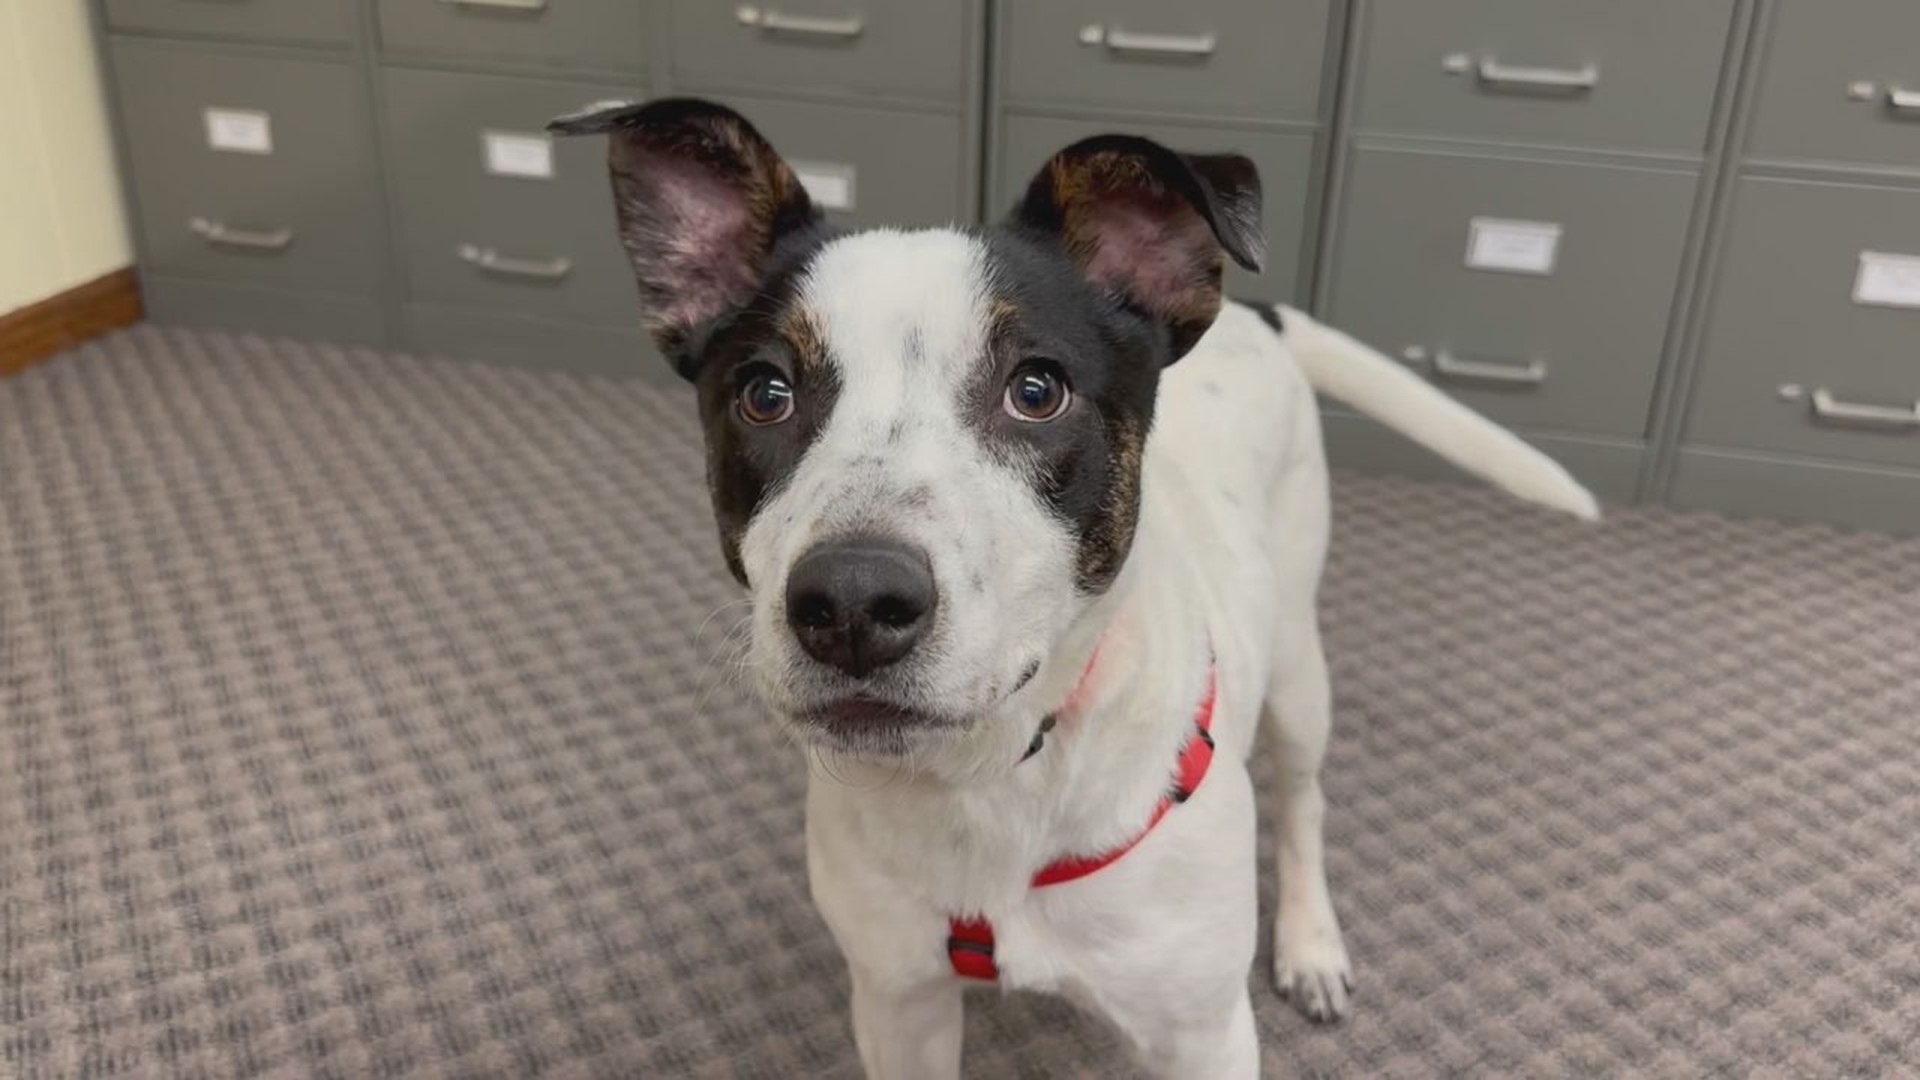 Ricky is a friendly, 7-month-old dog who'd fit into almost any home. He's available for adoption from Charlie's Crusaders Pet Rescue.